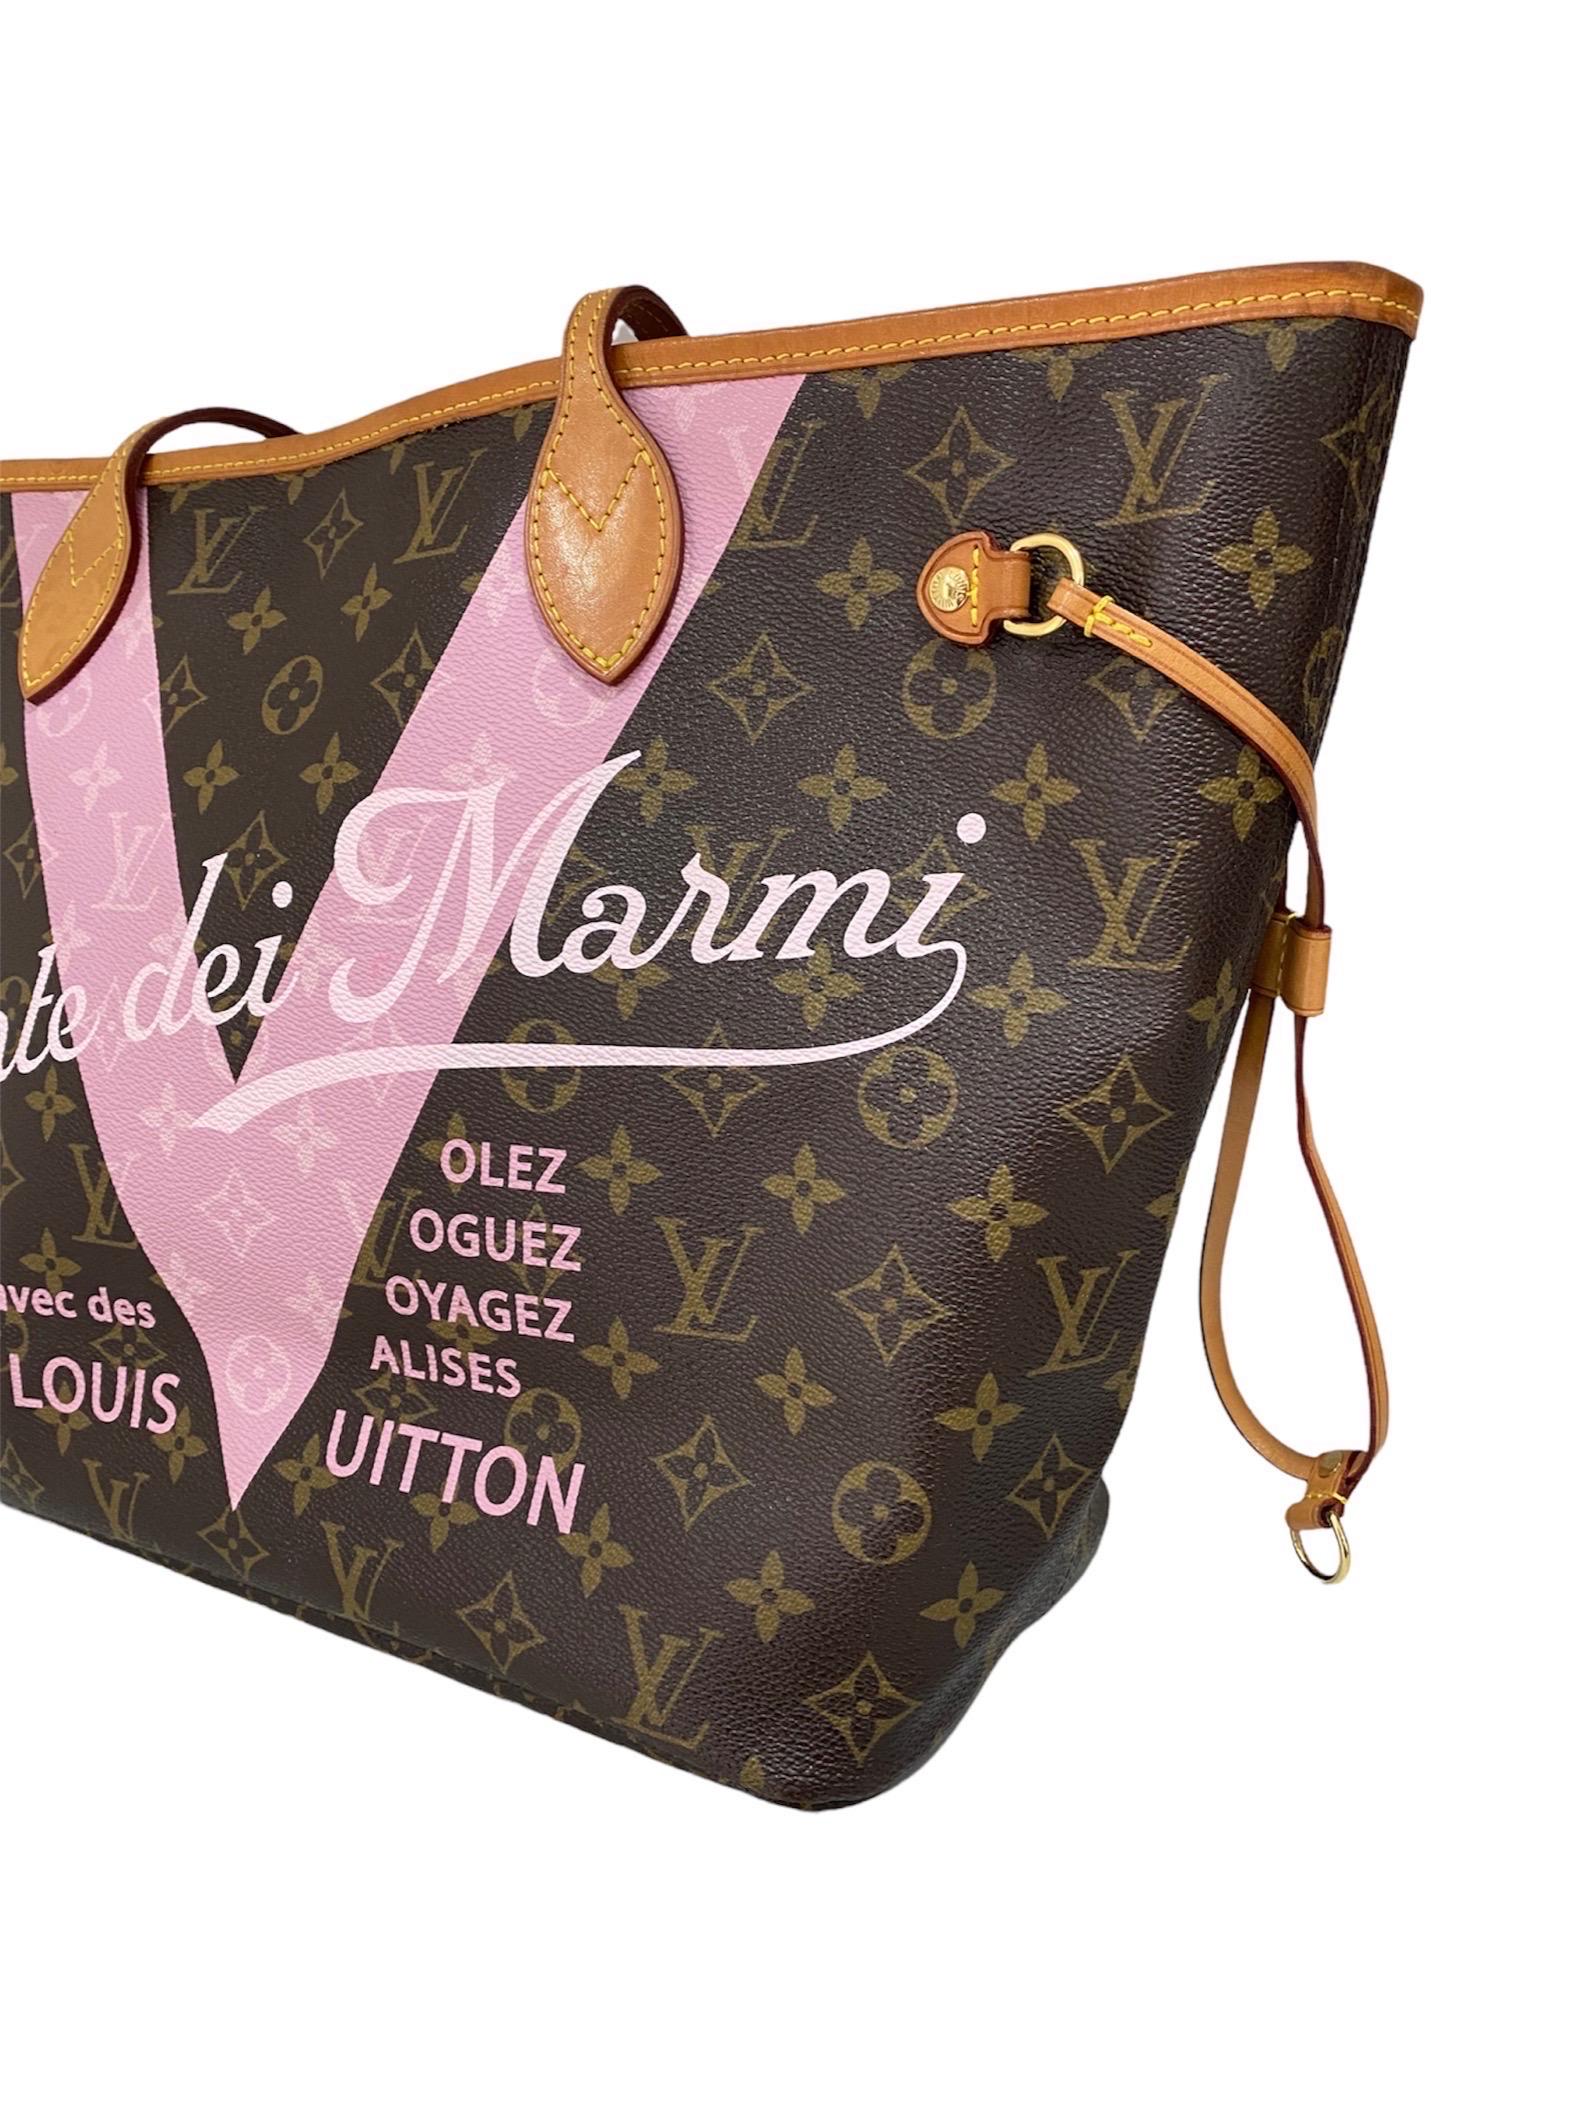 Louis Vuitton bag, Neverfull model, size MM, limited edition, year of production 2013, made in monogram canvas with front writing in pink and white.

Equipped with a central closure with hook, internally lined in pink striped fabric, very